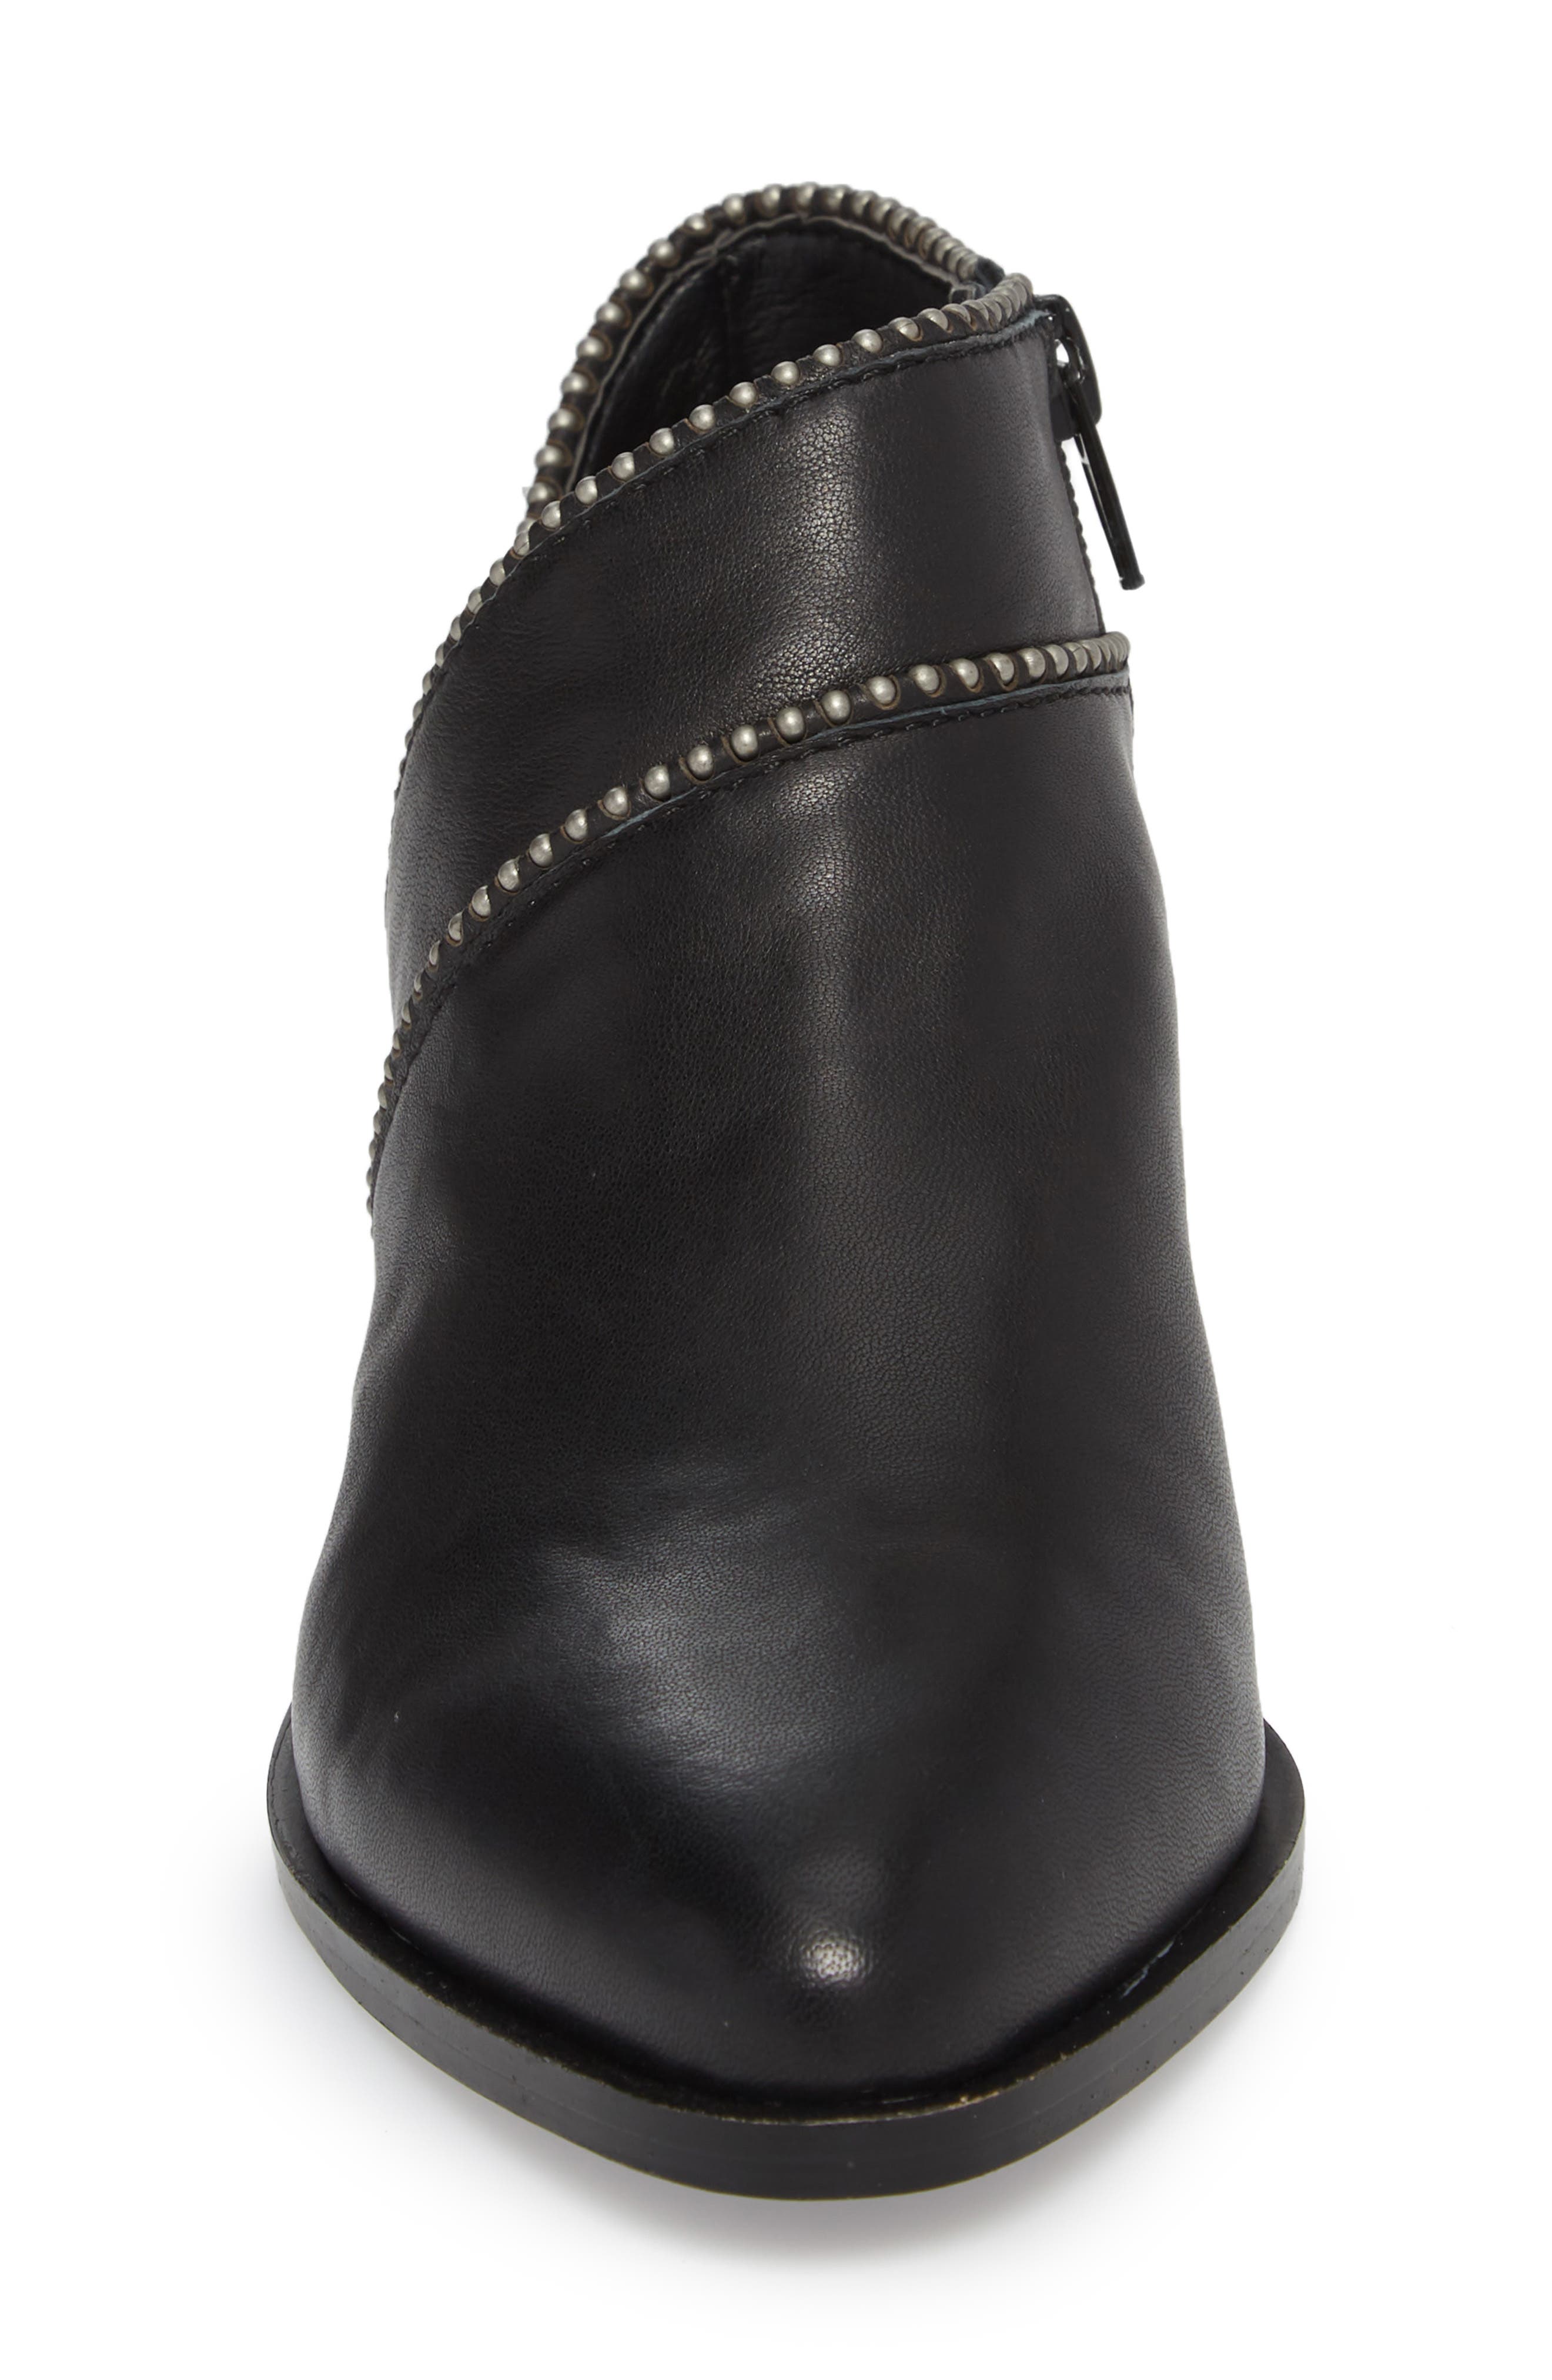 perrma bootie lucky brand